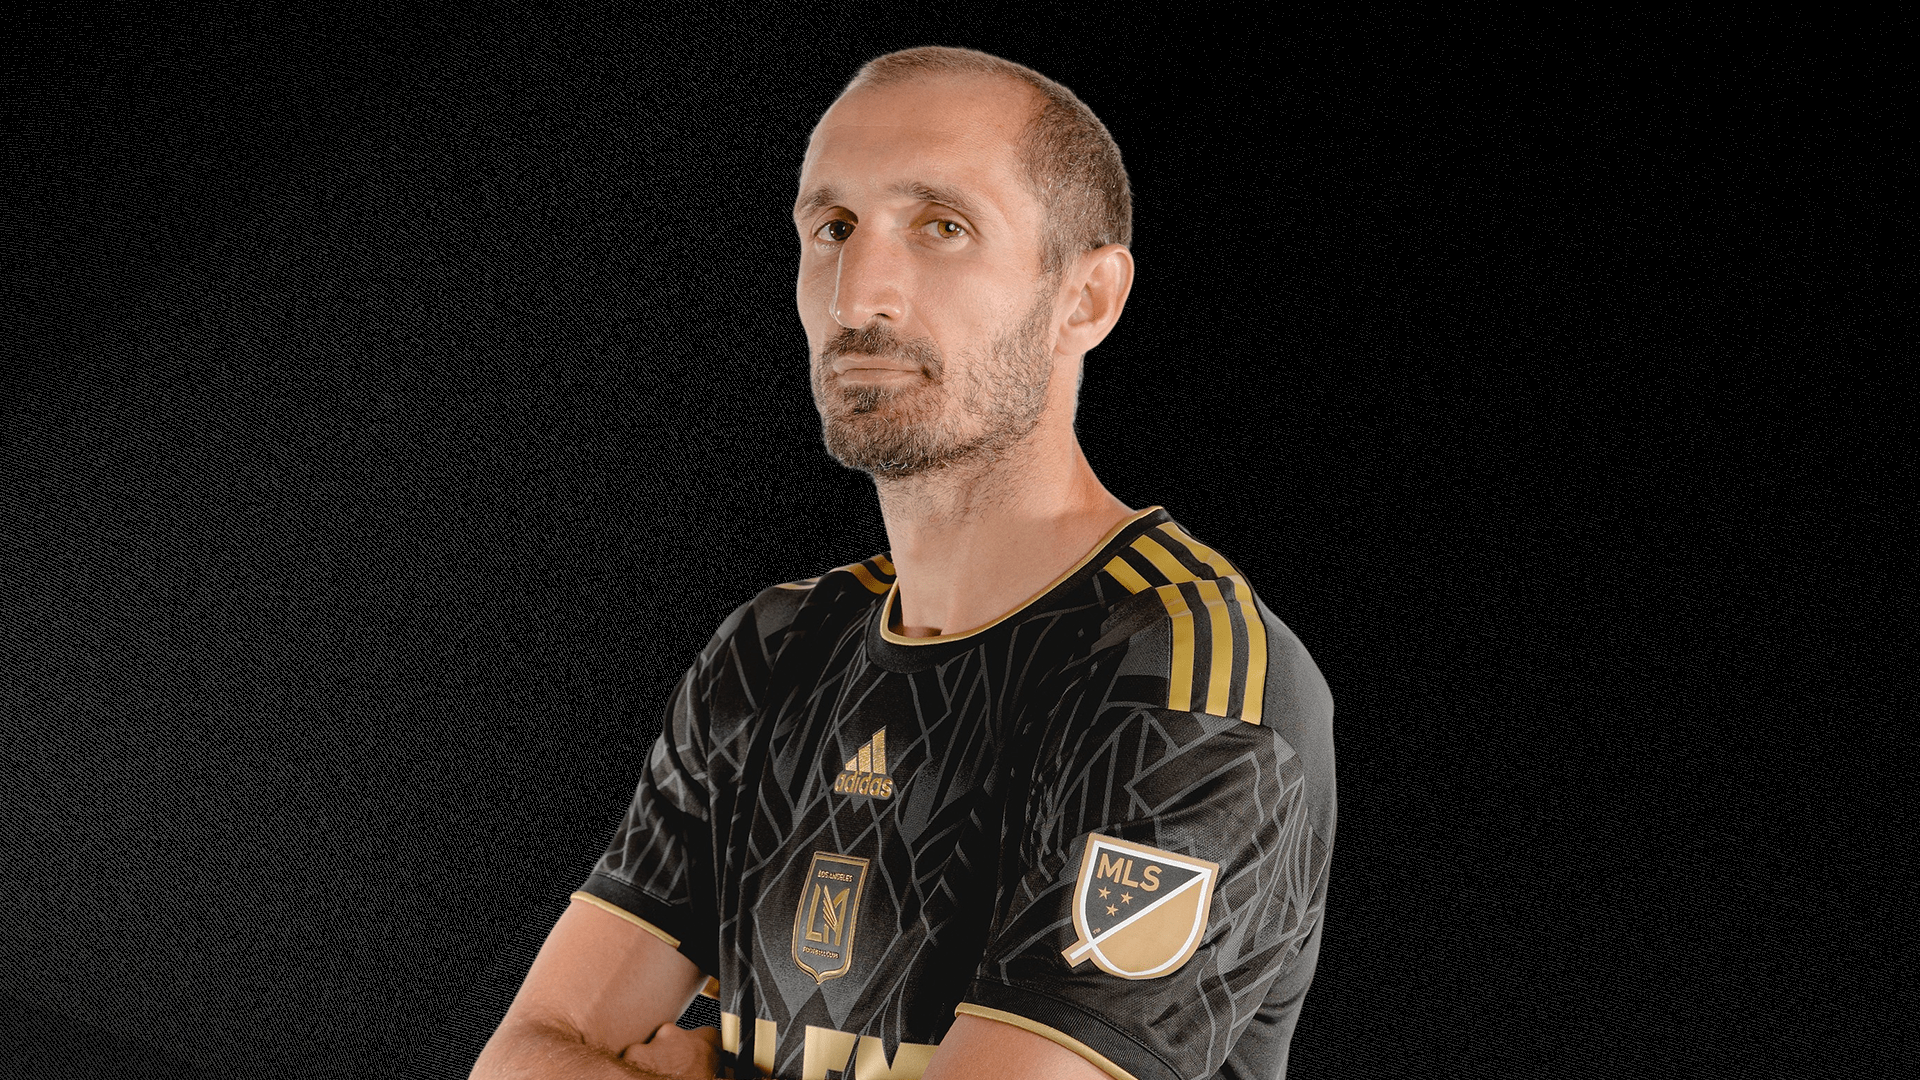 You are currently viewing “World-class” Chiellini shows his value as LAFC win in Italian’s debut